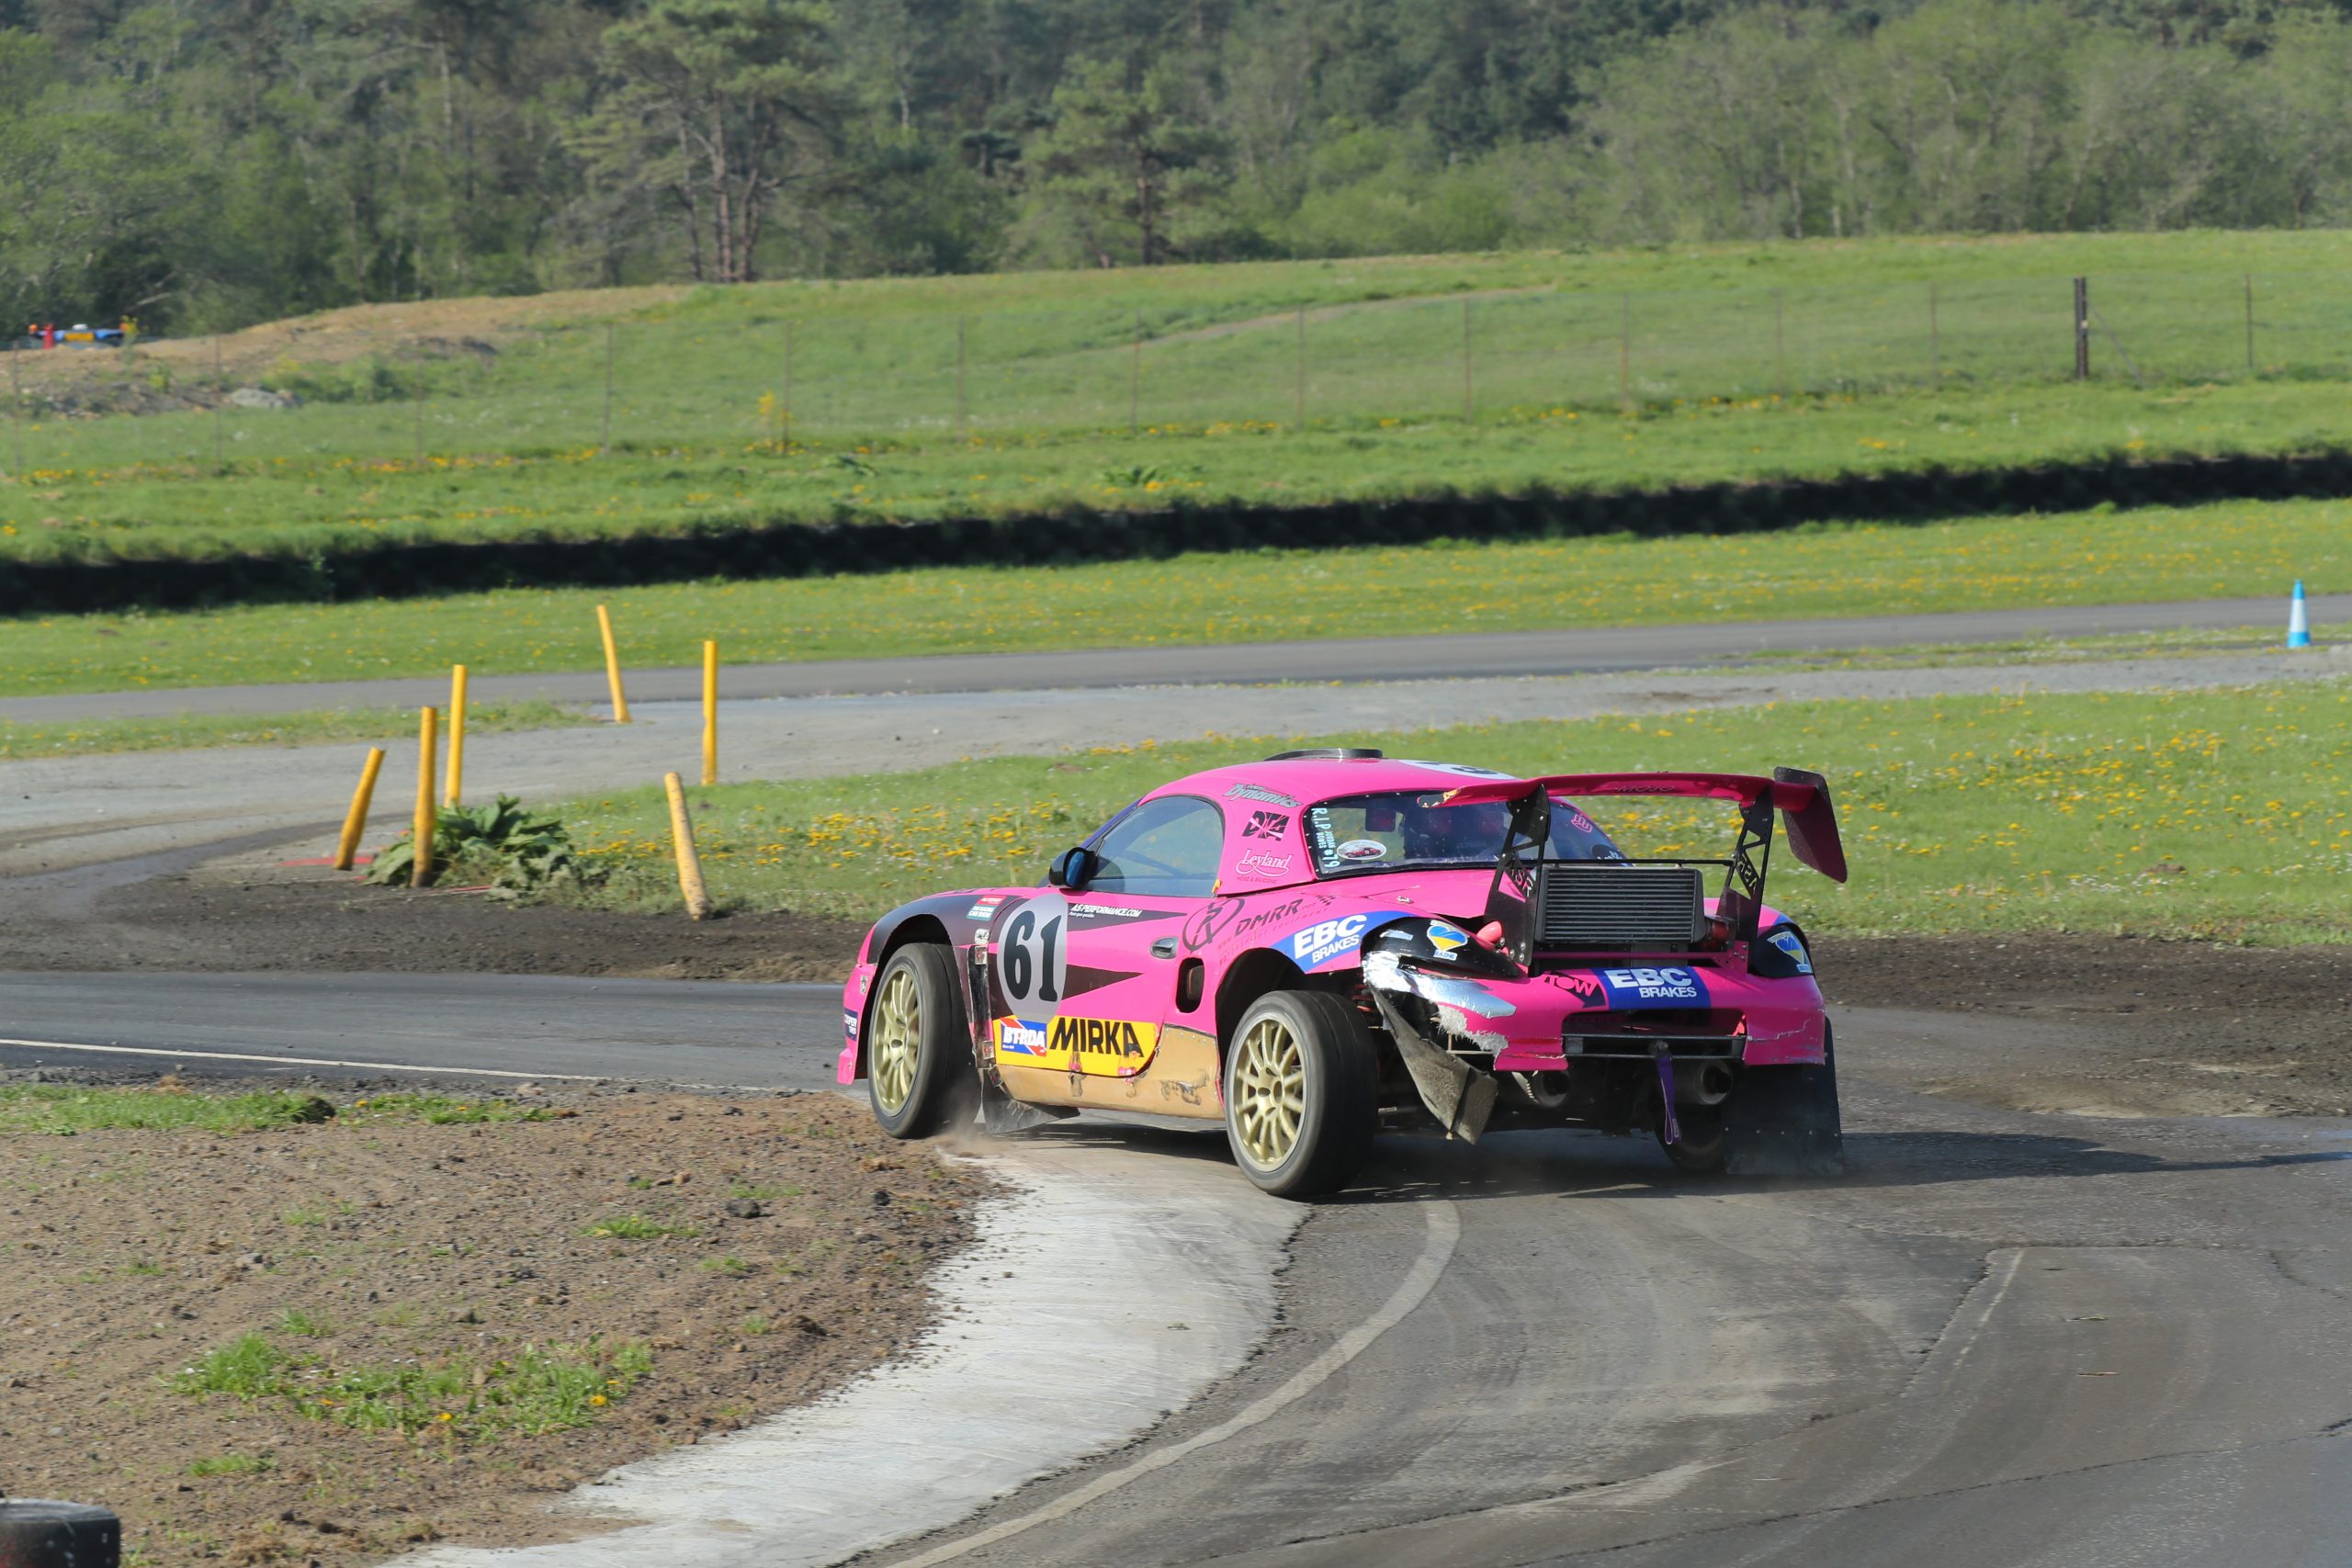 Angry Spider Racing Team Continues BTRDA Rallycross Campaign at Pembrey